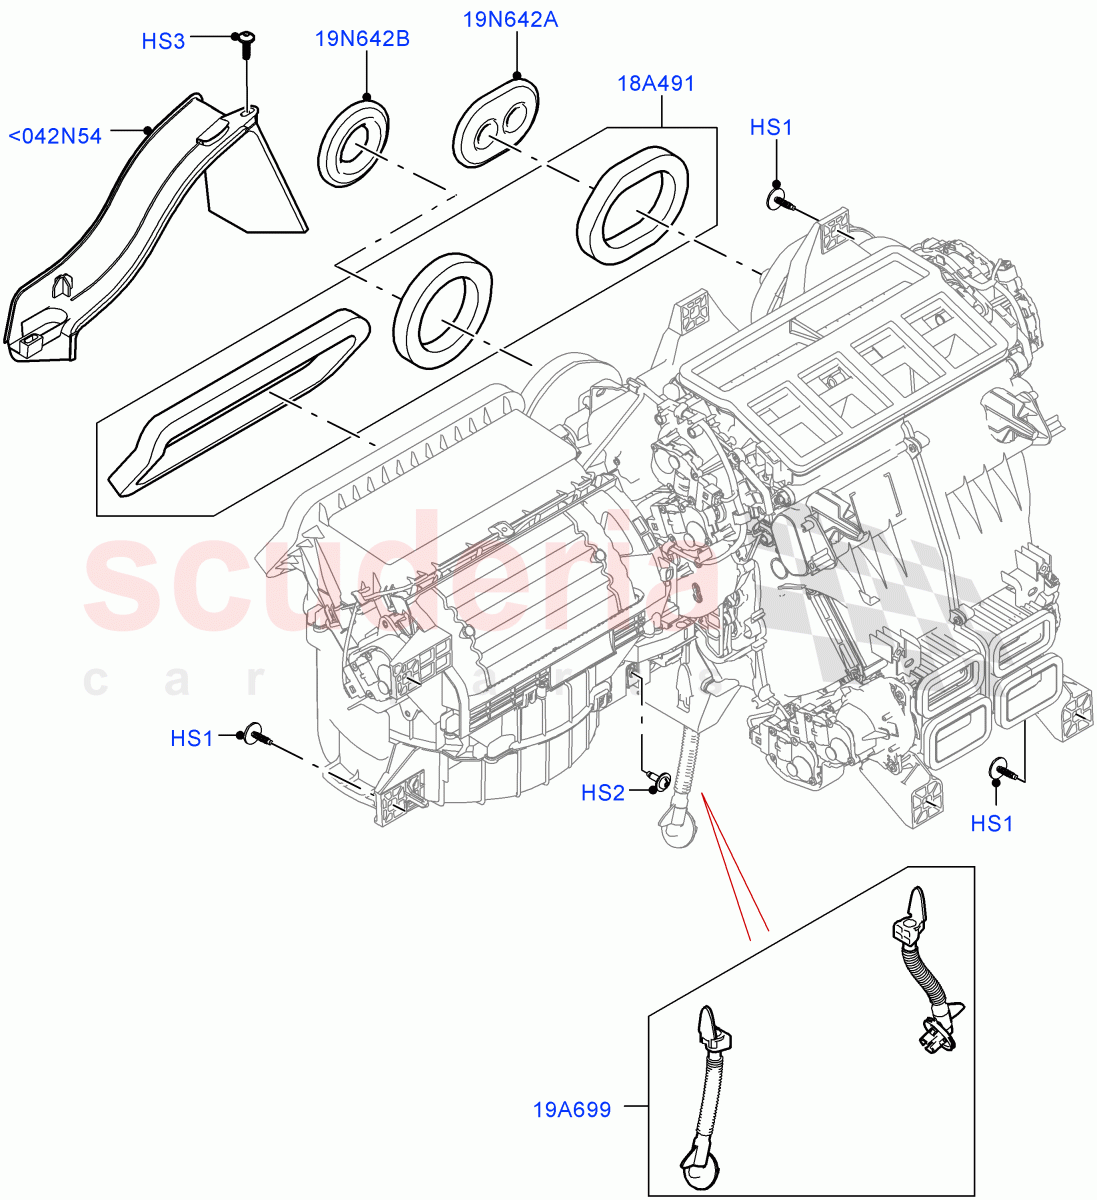 Heater/Air Cond.External Components(Main Unit, Nitra Plant Build) of Land Rover Land Rover Defender (2020+) [3.0 I6 Turbo Diesel AJ20D6]